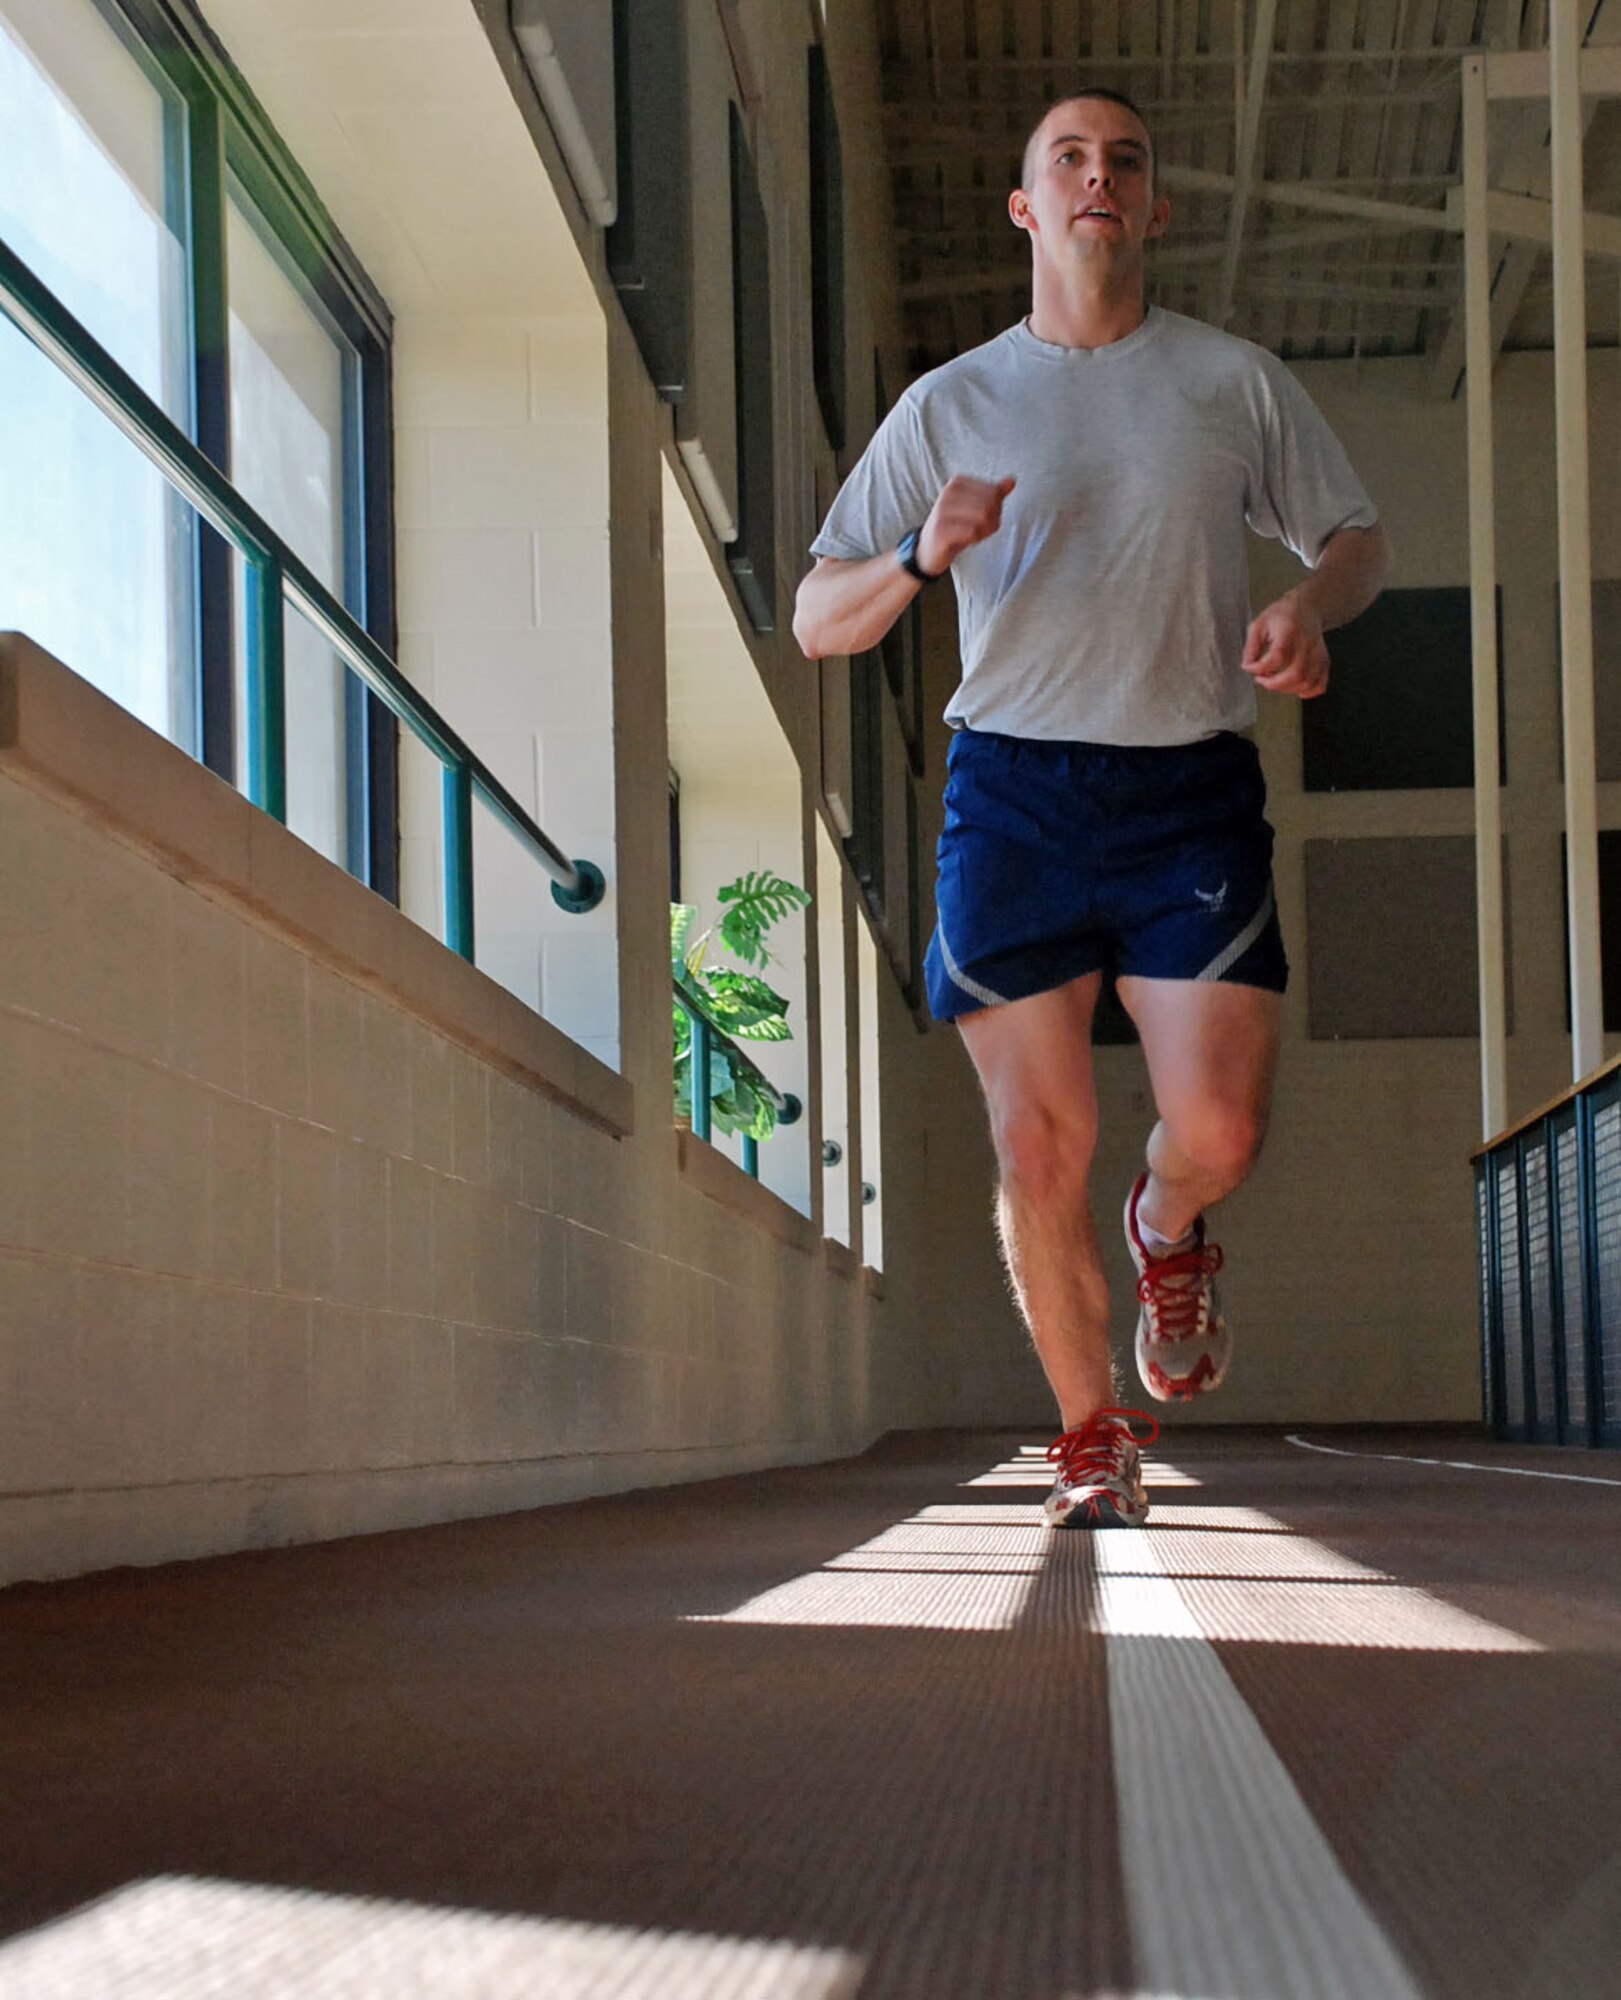 LAUGHLIN AIR FORCE BASE, Texas – 2nd Lt. Joel Borgan, 47th Operations Support Squadron, runs on the track inside the Losano Fitness Center Jan.6. Lieutenant Borgan is running to keep true to his New Year’s resolution of staying in shape for 2009. (U.S. Air Force photo by Airman 1st Class Sara Csurilla)